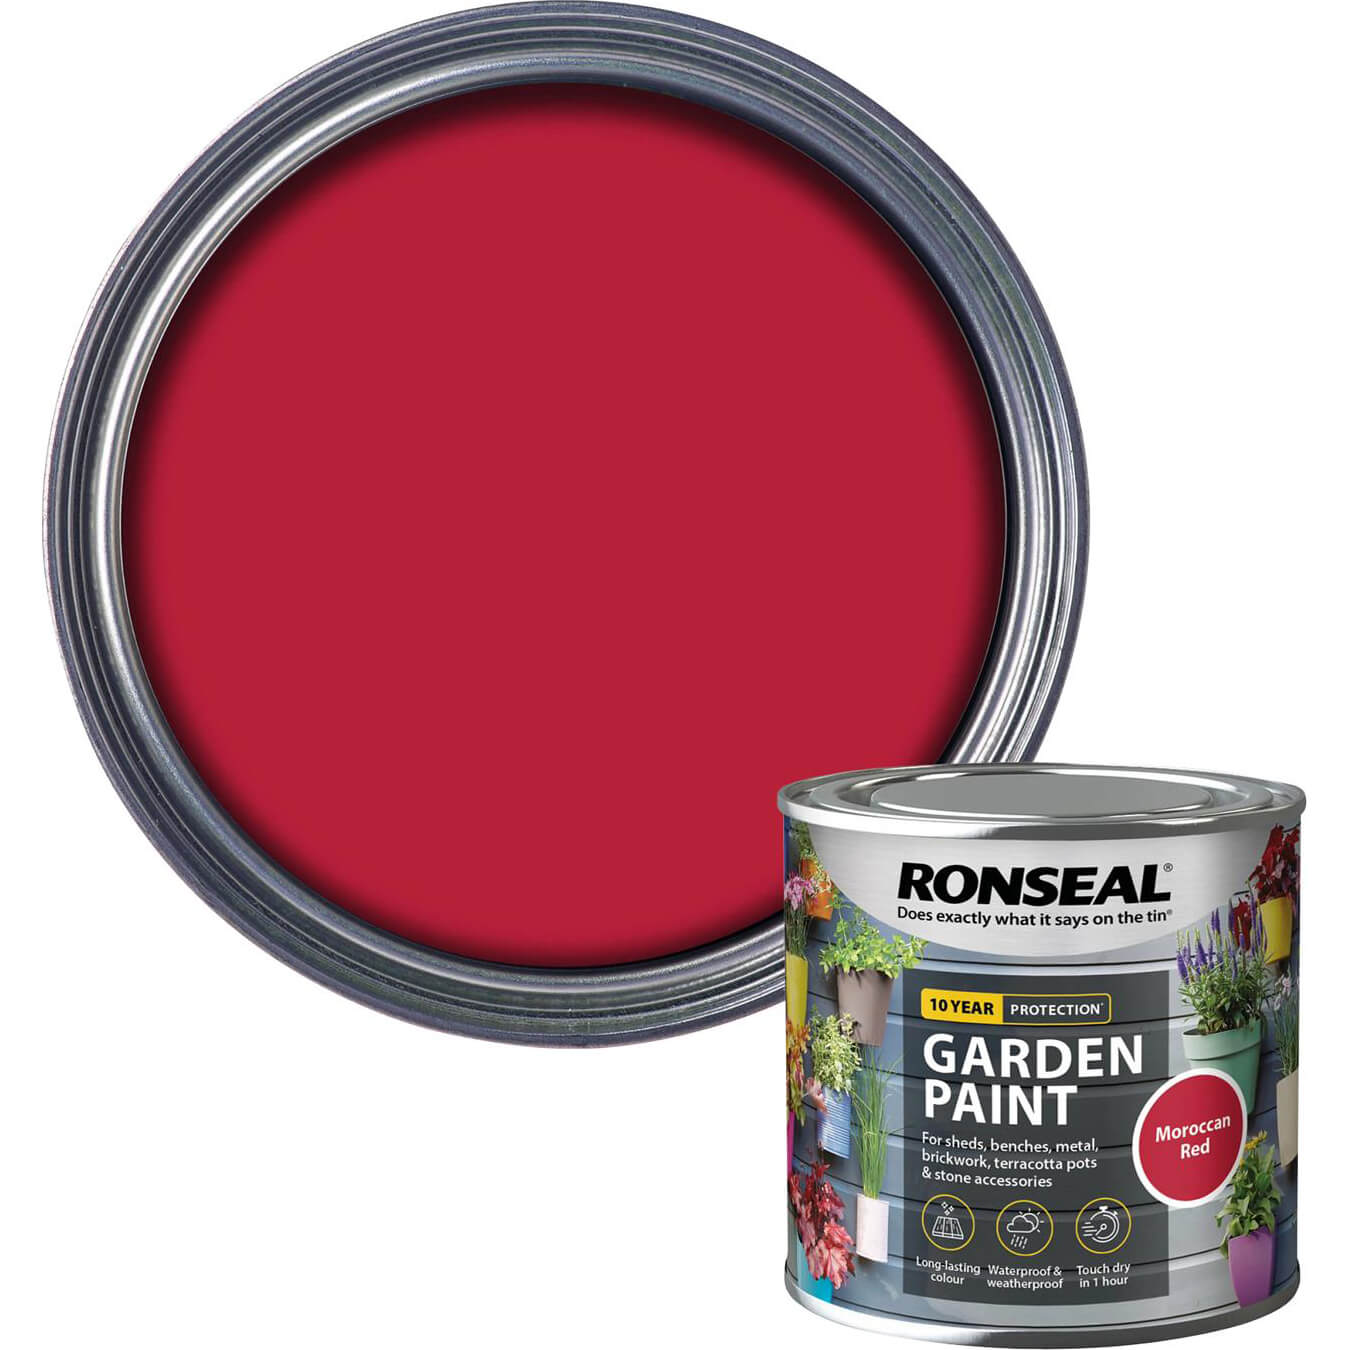 Image of Ronseal General Purpose Garden Paint Moroccan Red 250ml